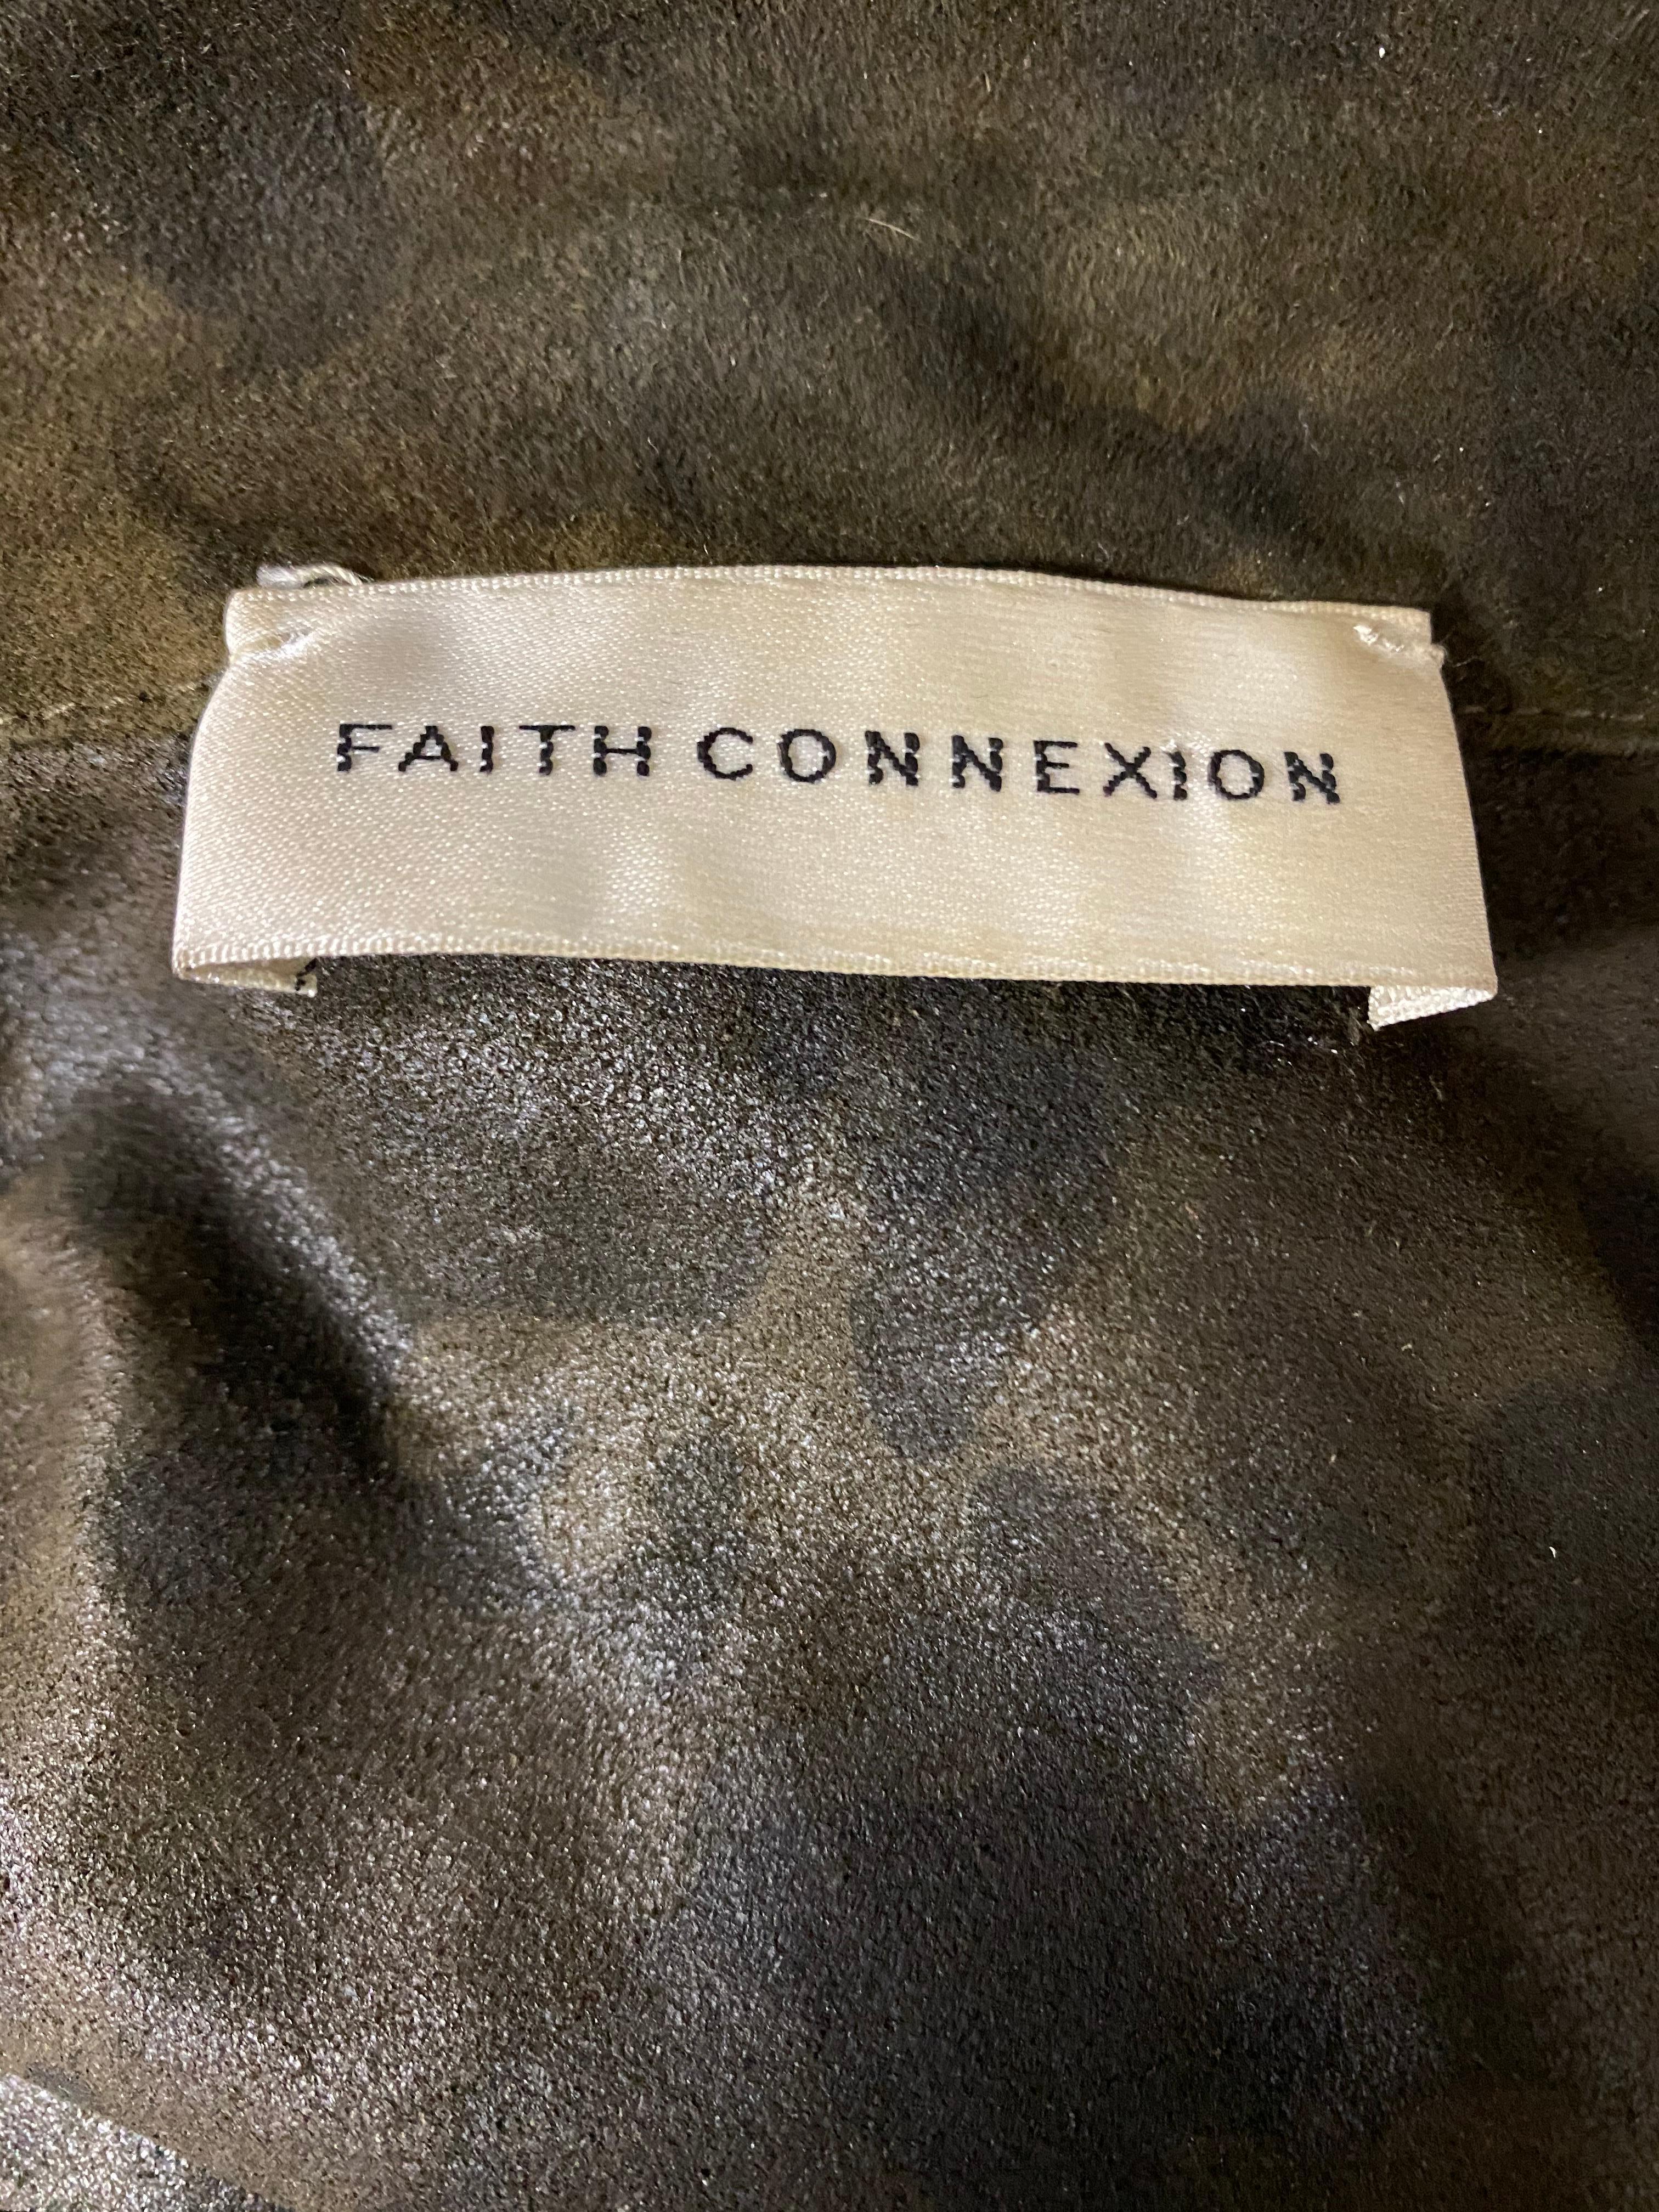 Faith Connextion Green Camouflage Jacket, Size Medium In Excellent Condition For Sale In Beverly Hills, CA